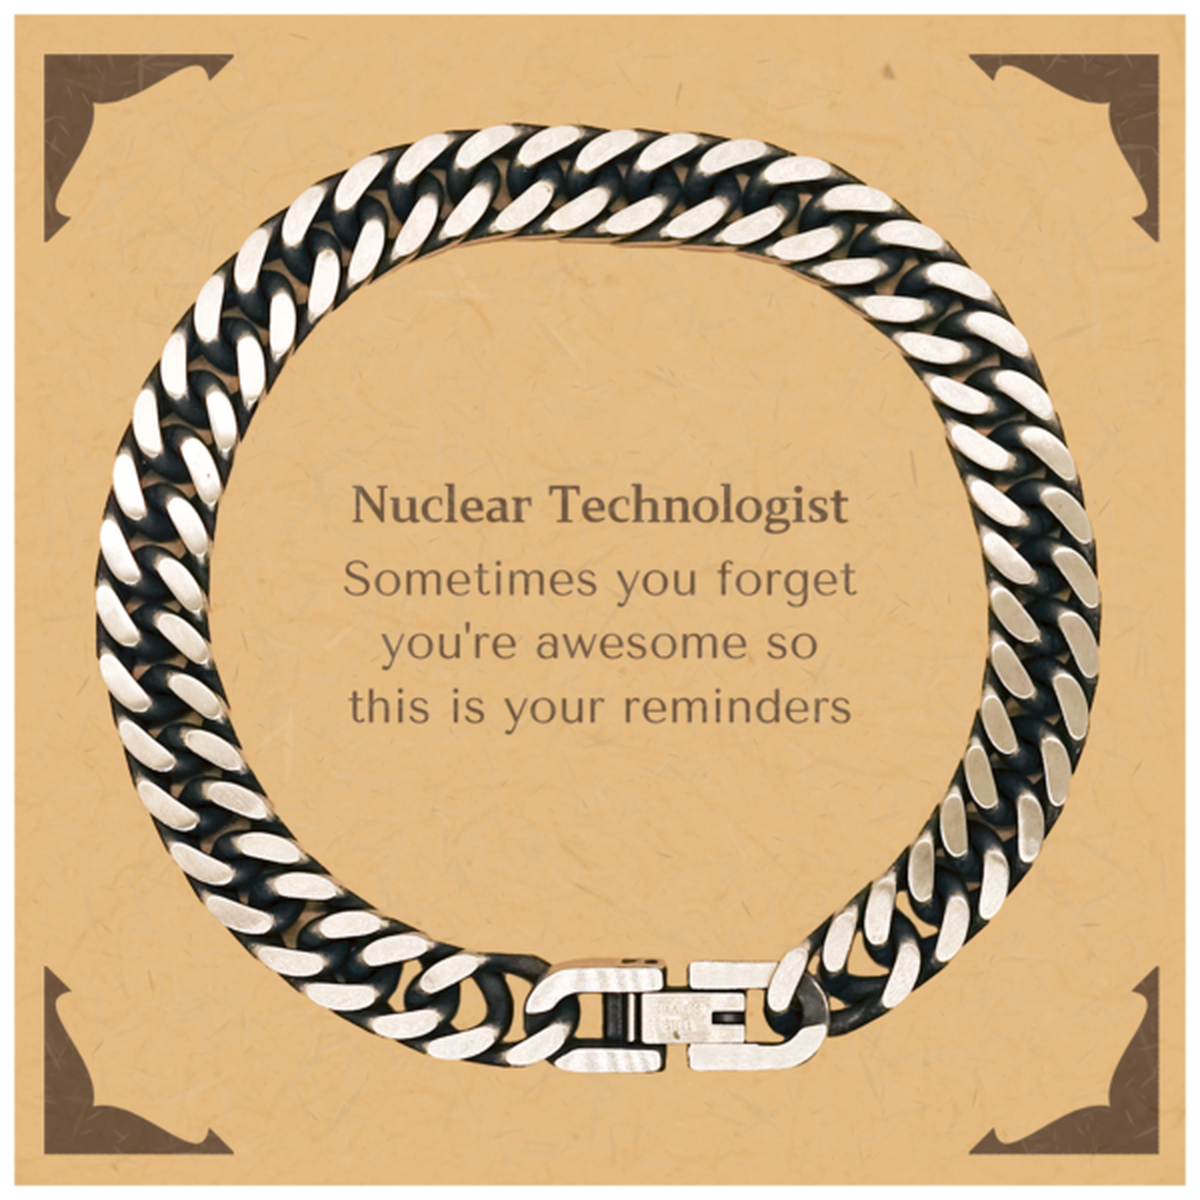 Sentimental Nuclear Technologist Cuban Link Chain Bracelet, Nuclear Technologist Sometimes you forget you're awesome so this is your reminders, Graduation Christmas Birthday Gifts for Nuclear Technologist, Men, Women, Coworkers